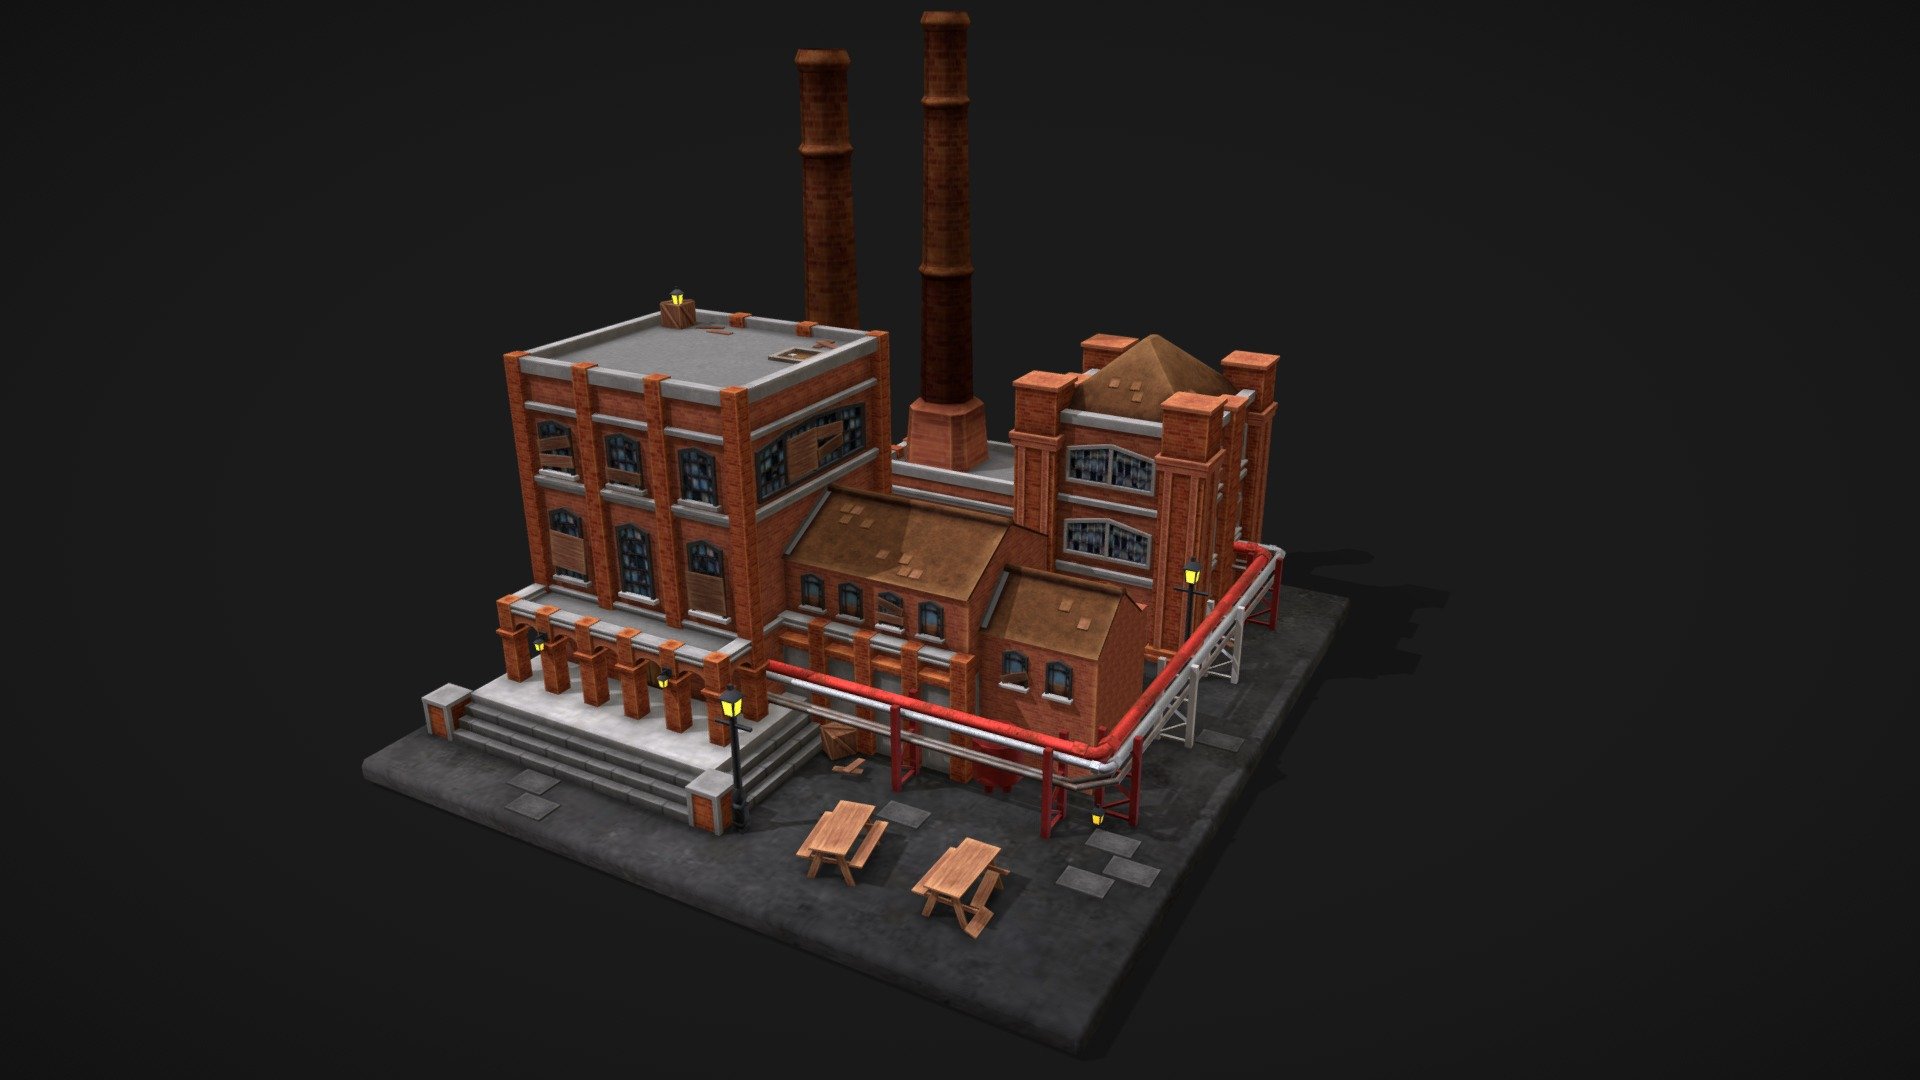 A Mobile game style diorama I created to play with making modular building pieces - Low Poly Factory - 3D model by doodlefunction 3d model